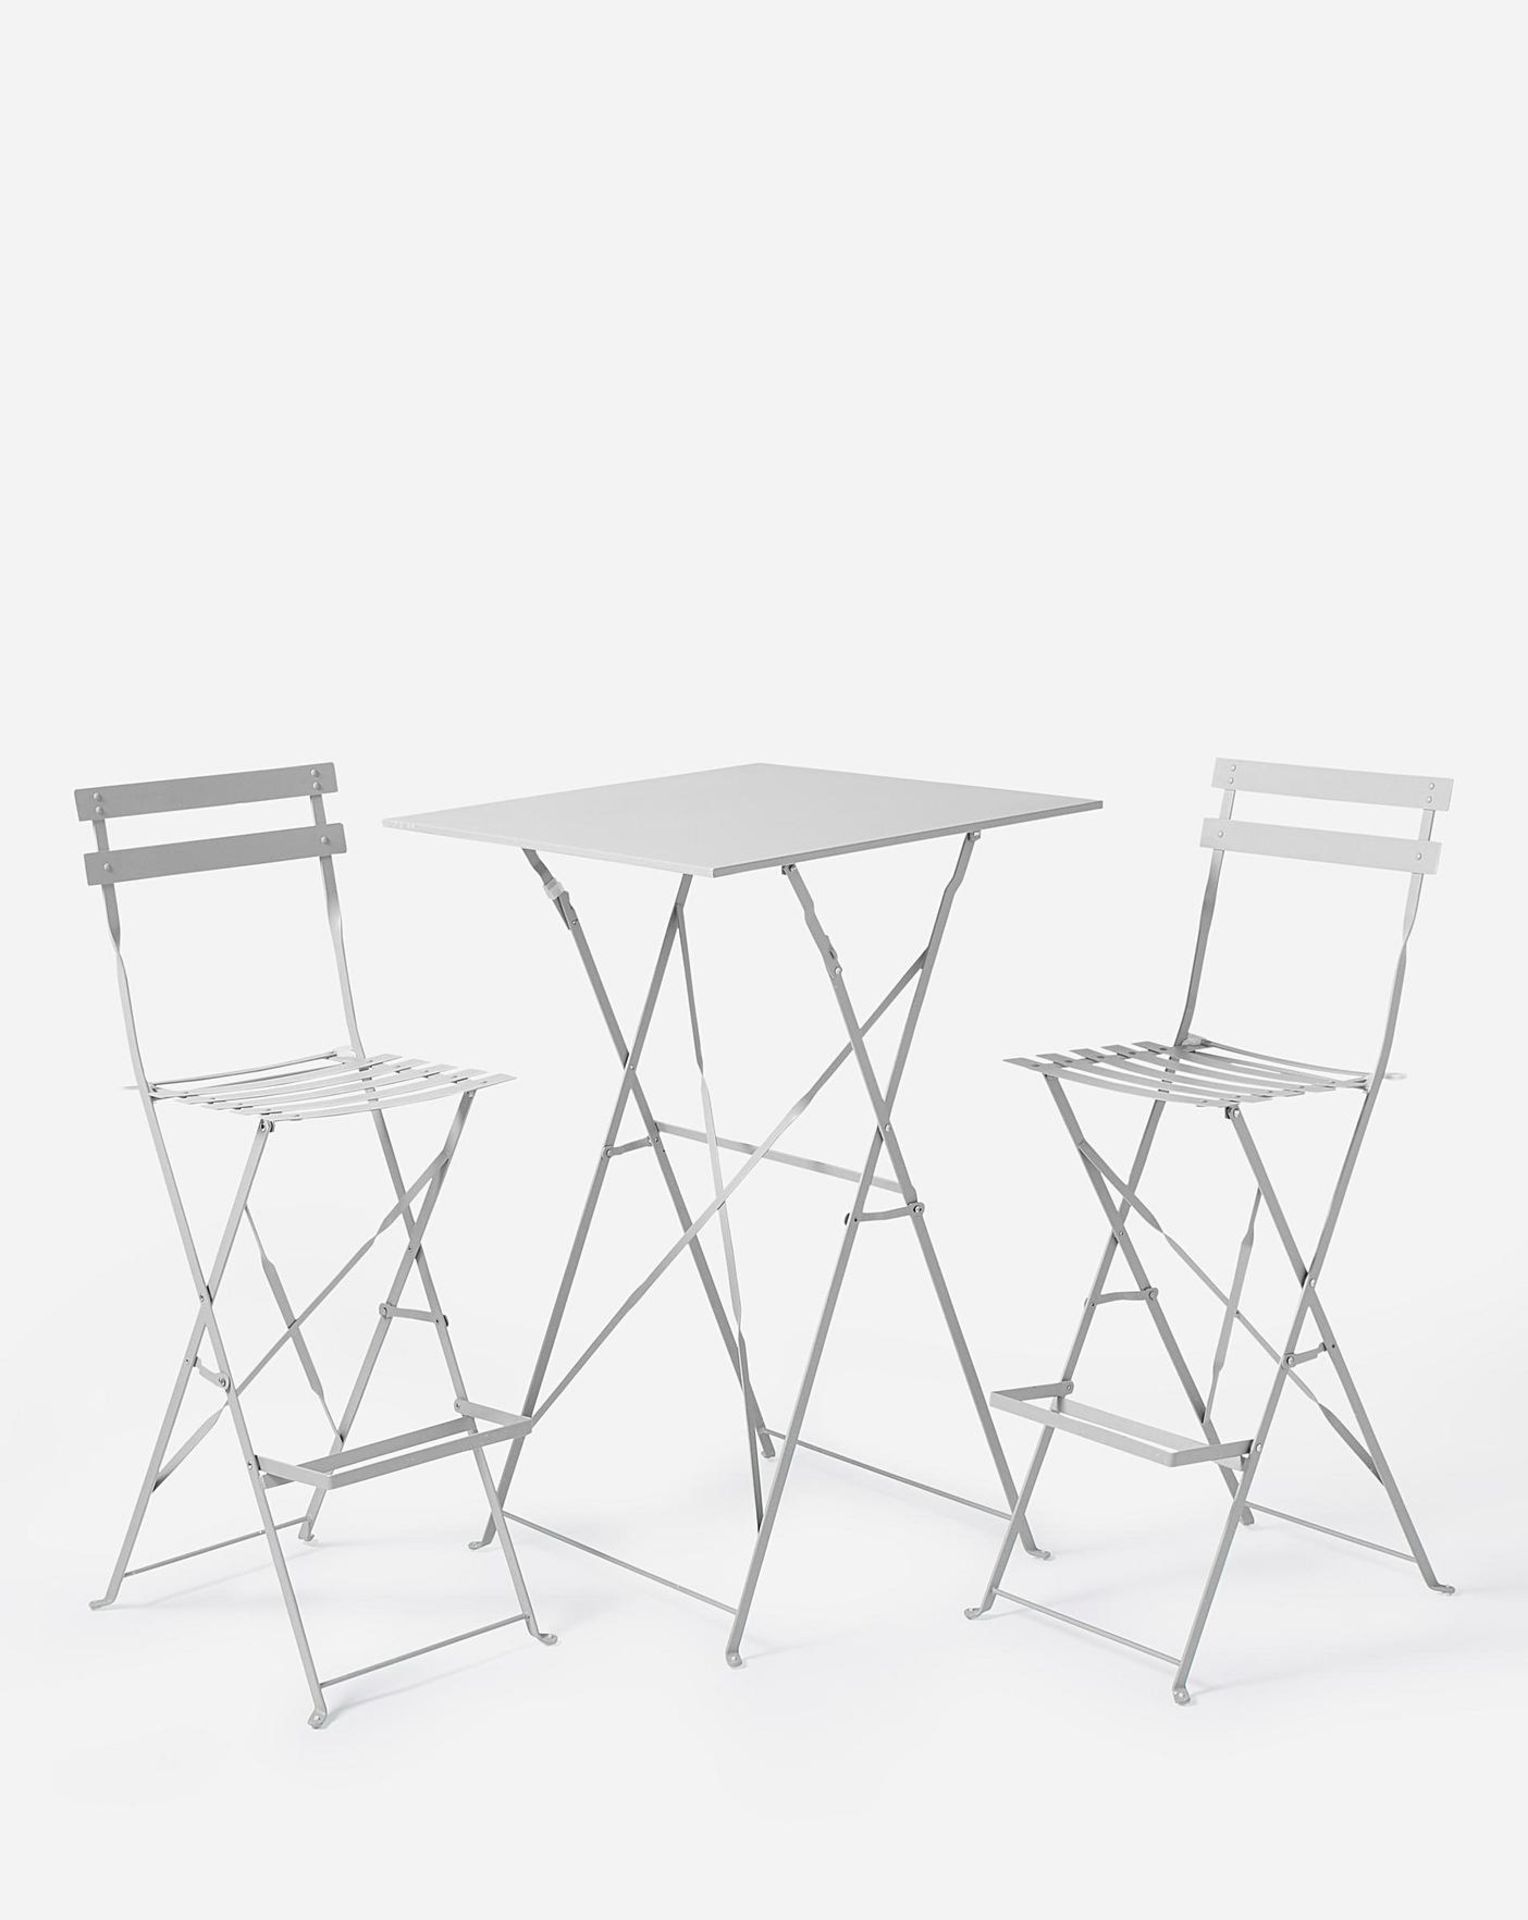 TRADE PALLET TO CONTAIN 6x BRAND NEW Palma Bistro Bar Set GREY. RRP £159 EACH. Liven up your - Image 3 of 3